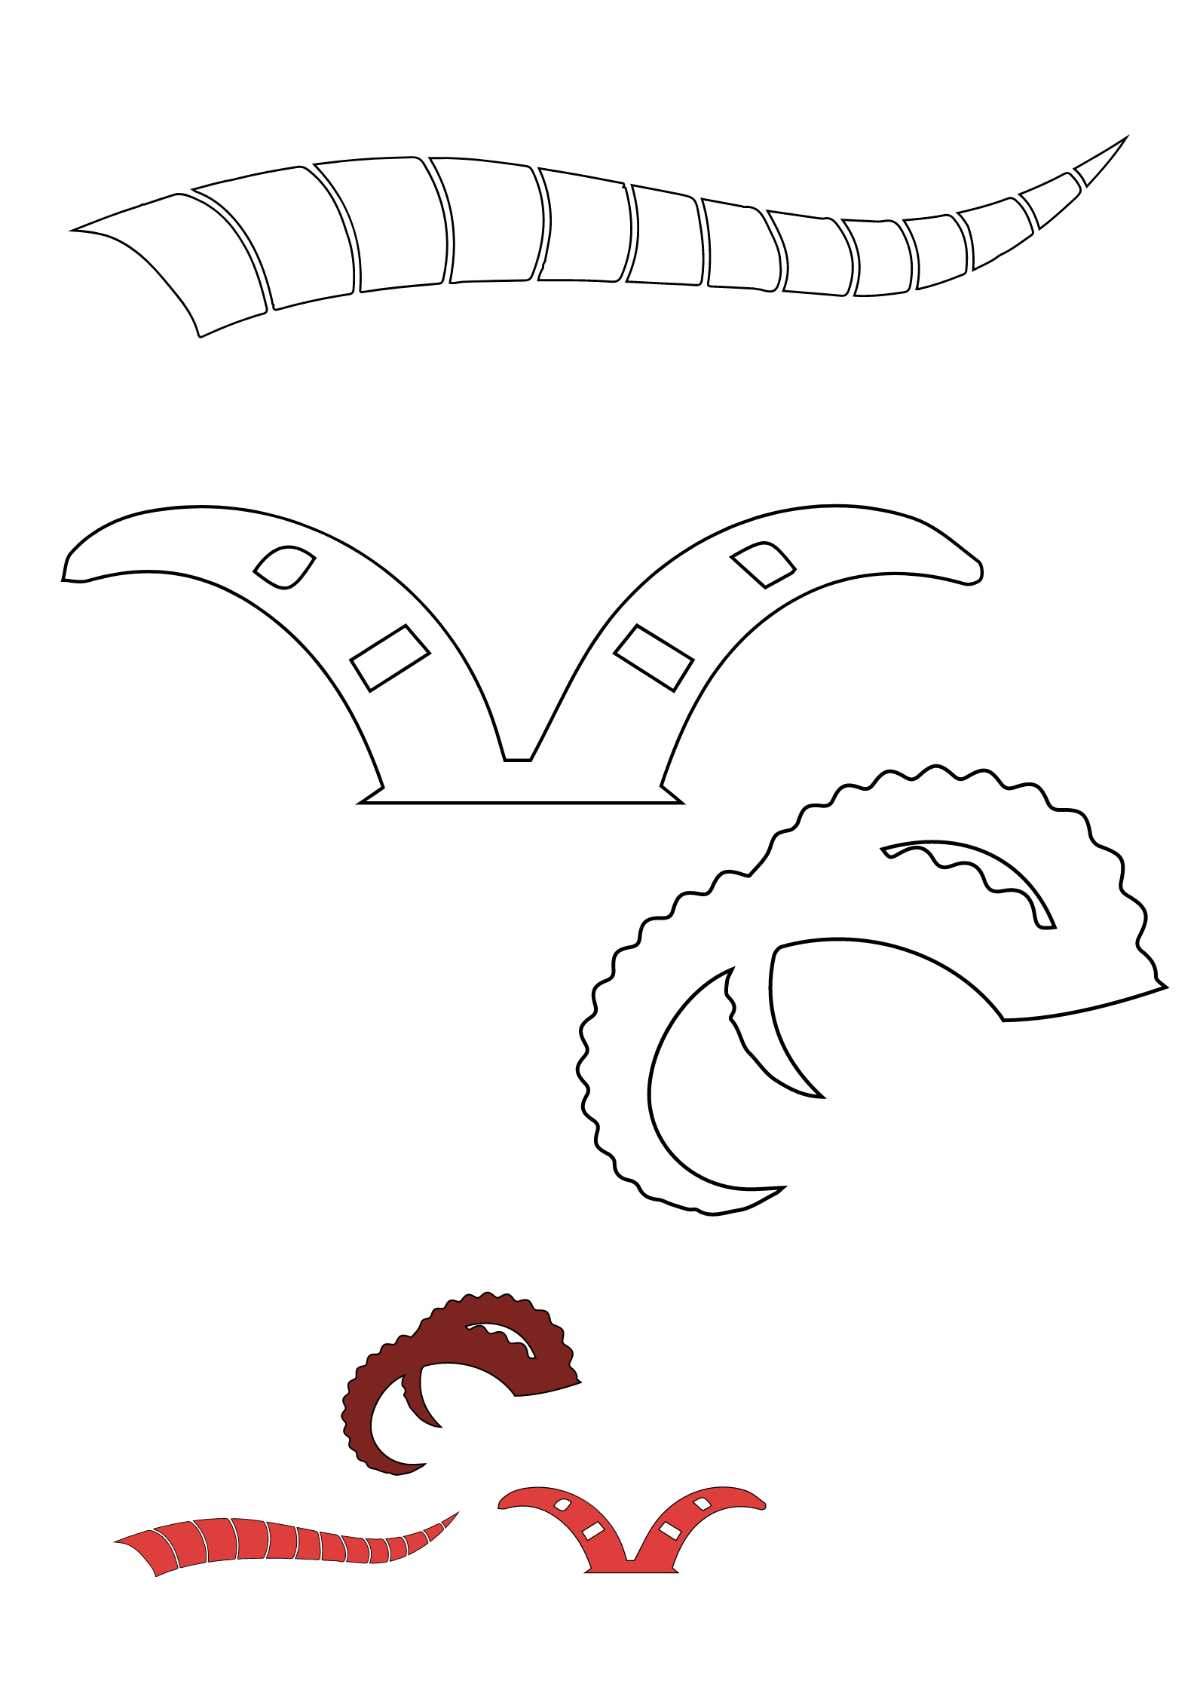 Capricorn Horn coloring page